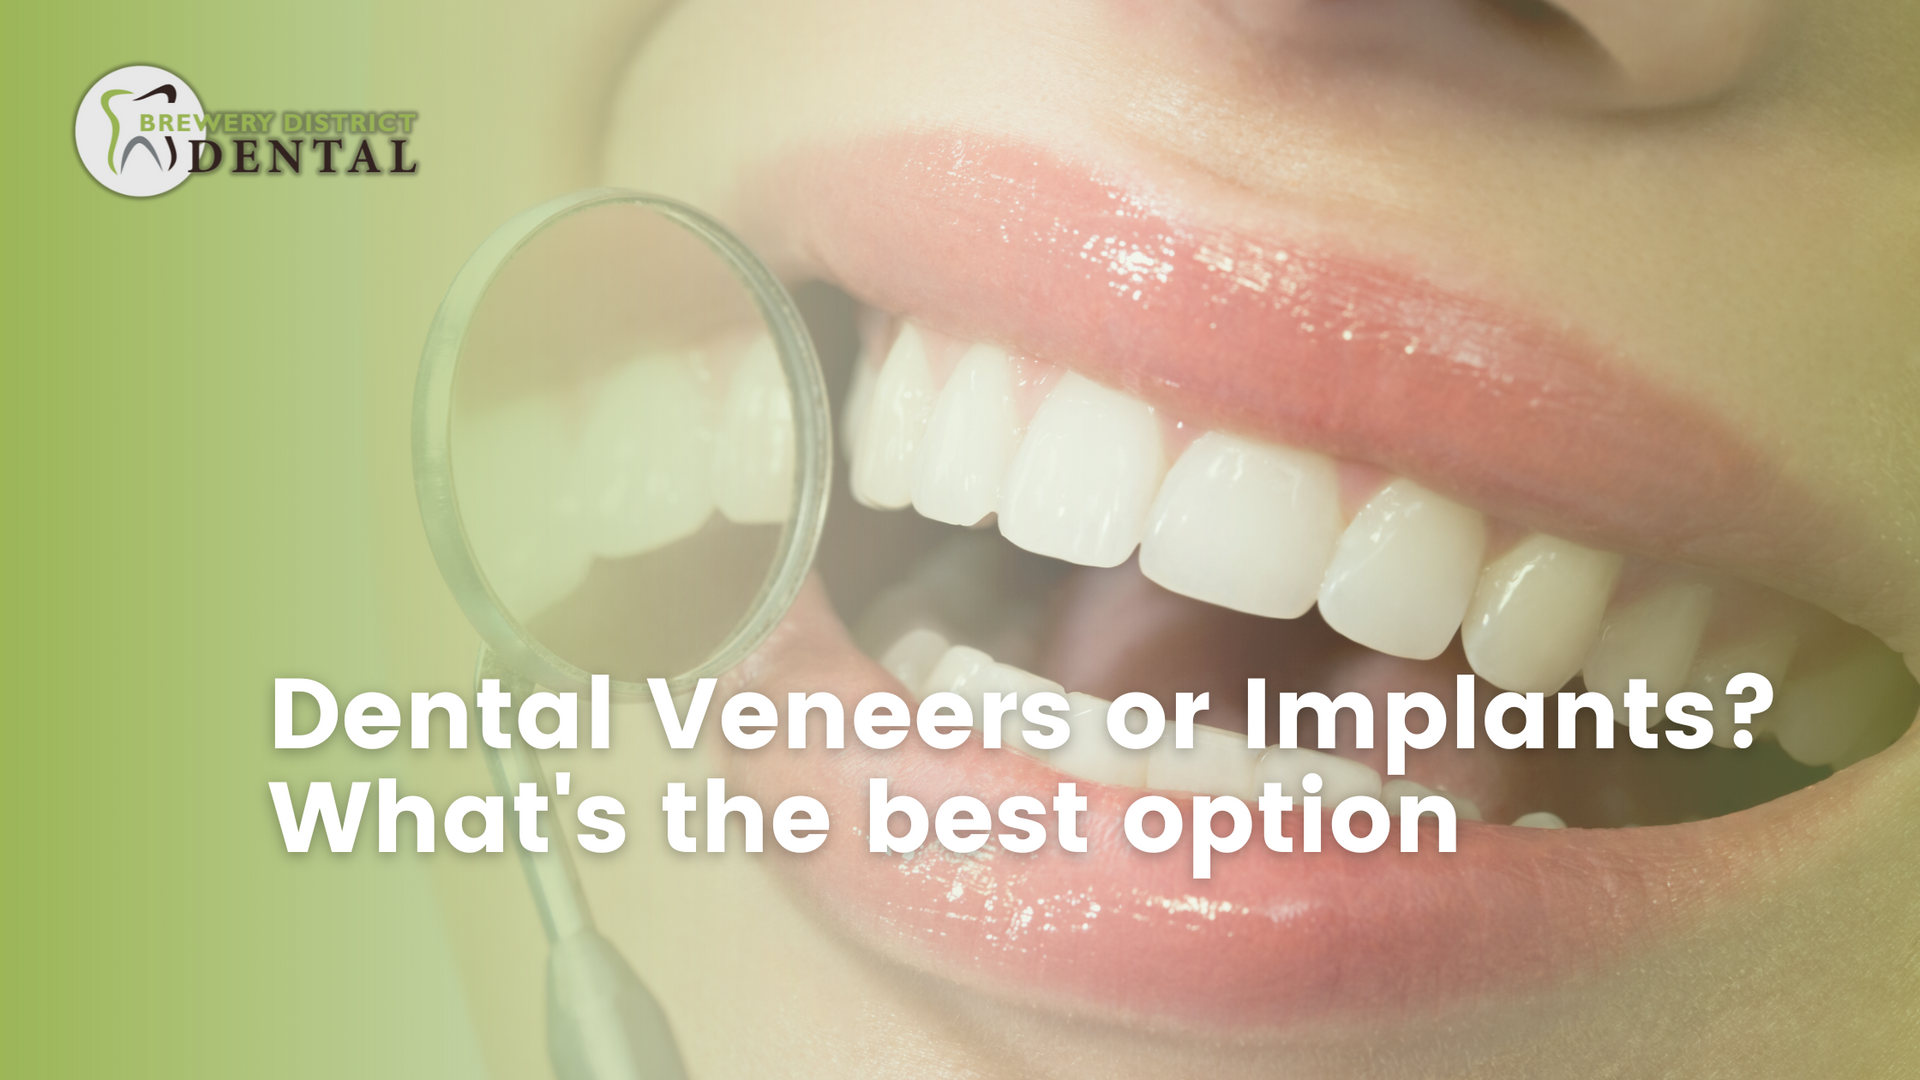 Straight beautiful teeth with mirror and title Dental Veneers or Implants? What's The Best Option